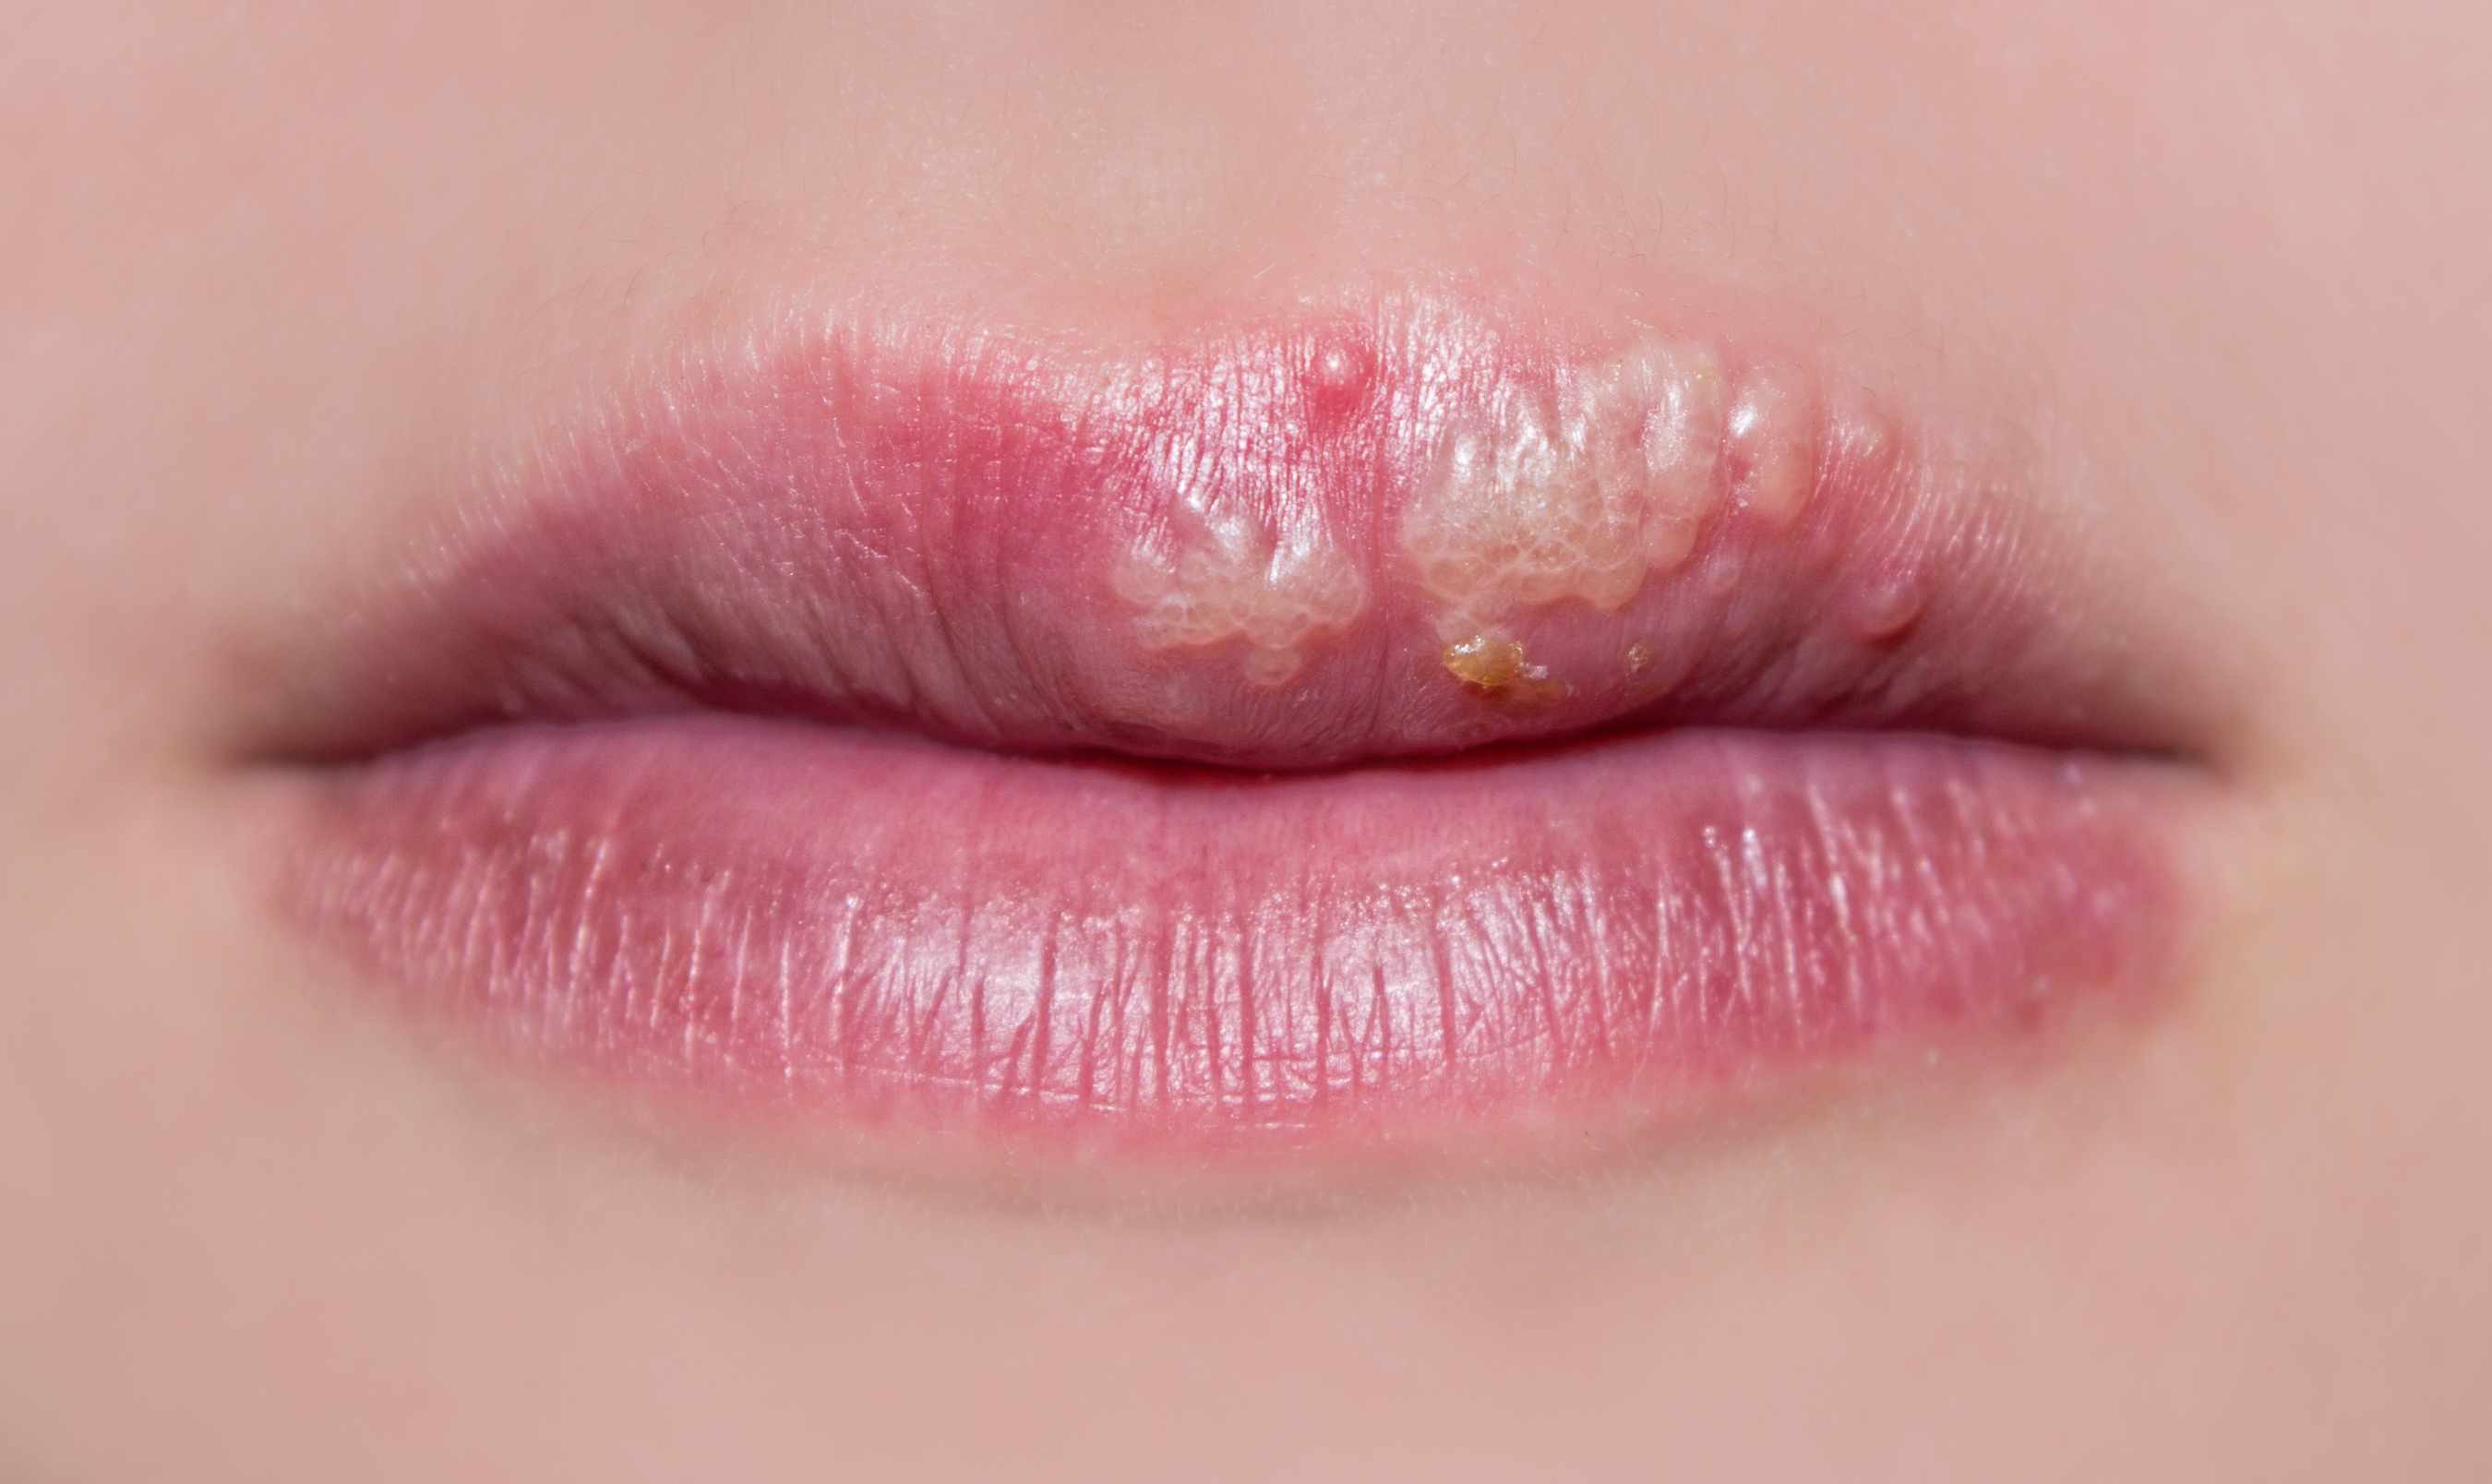 a close-up of a woman's lips with cold sores